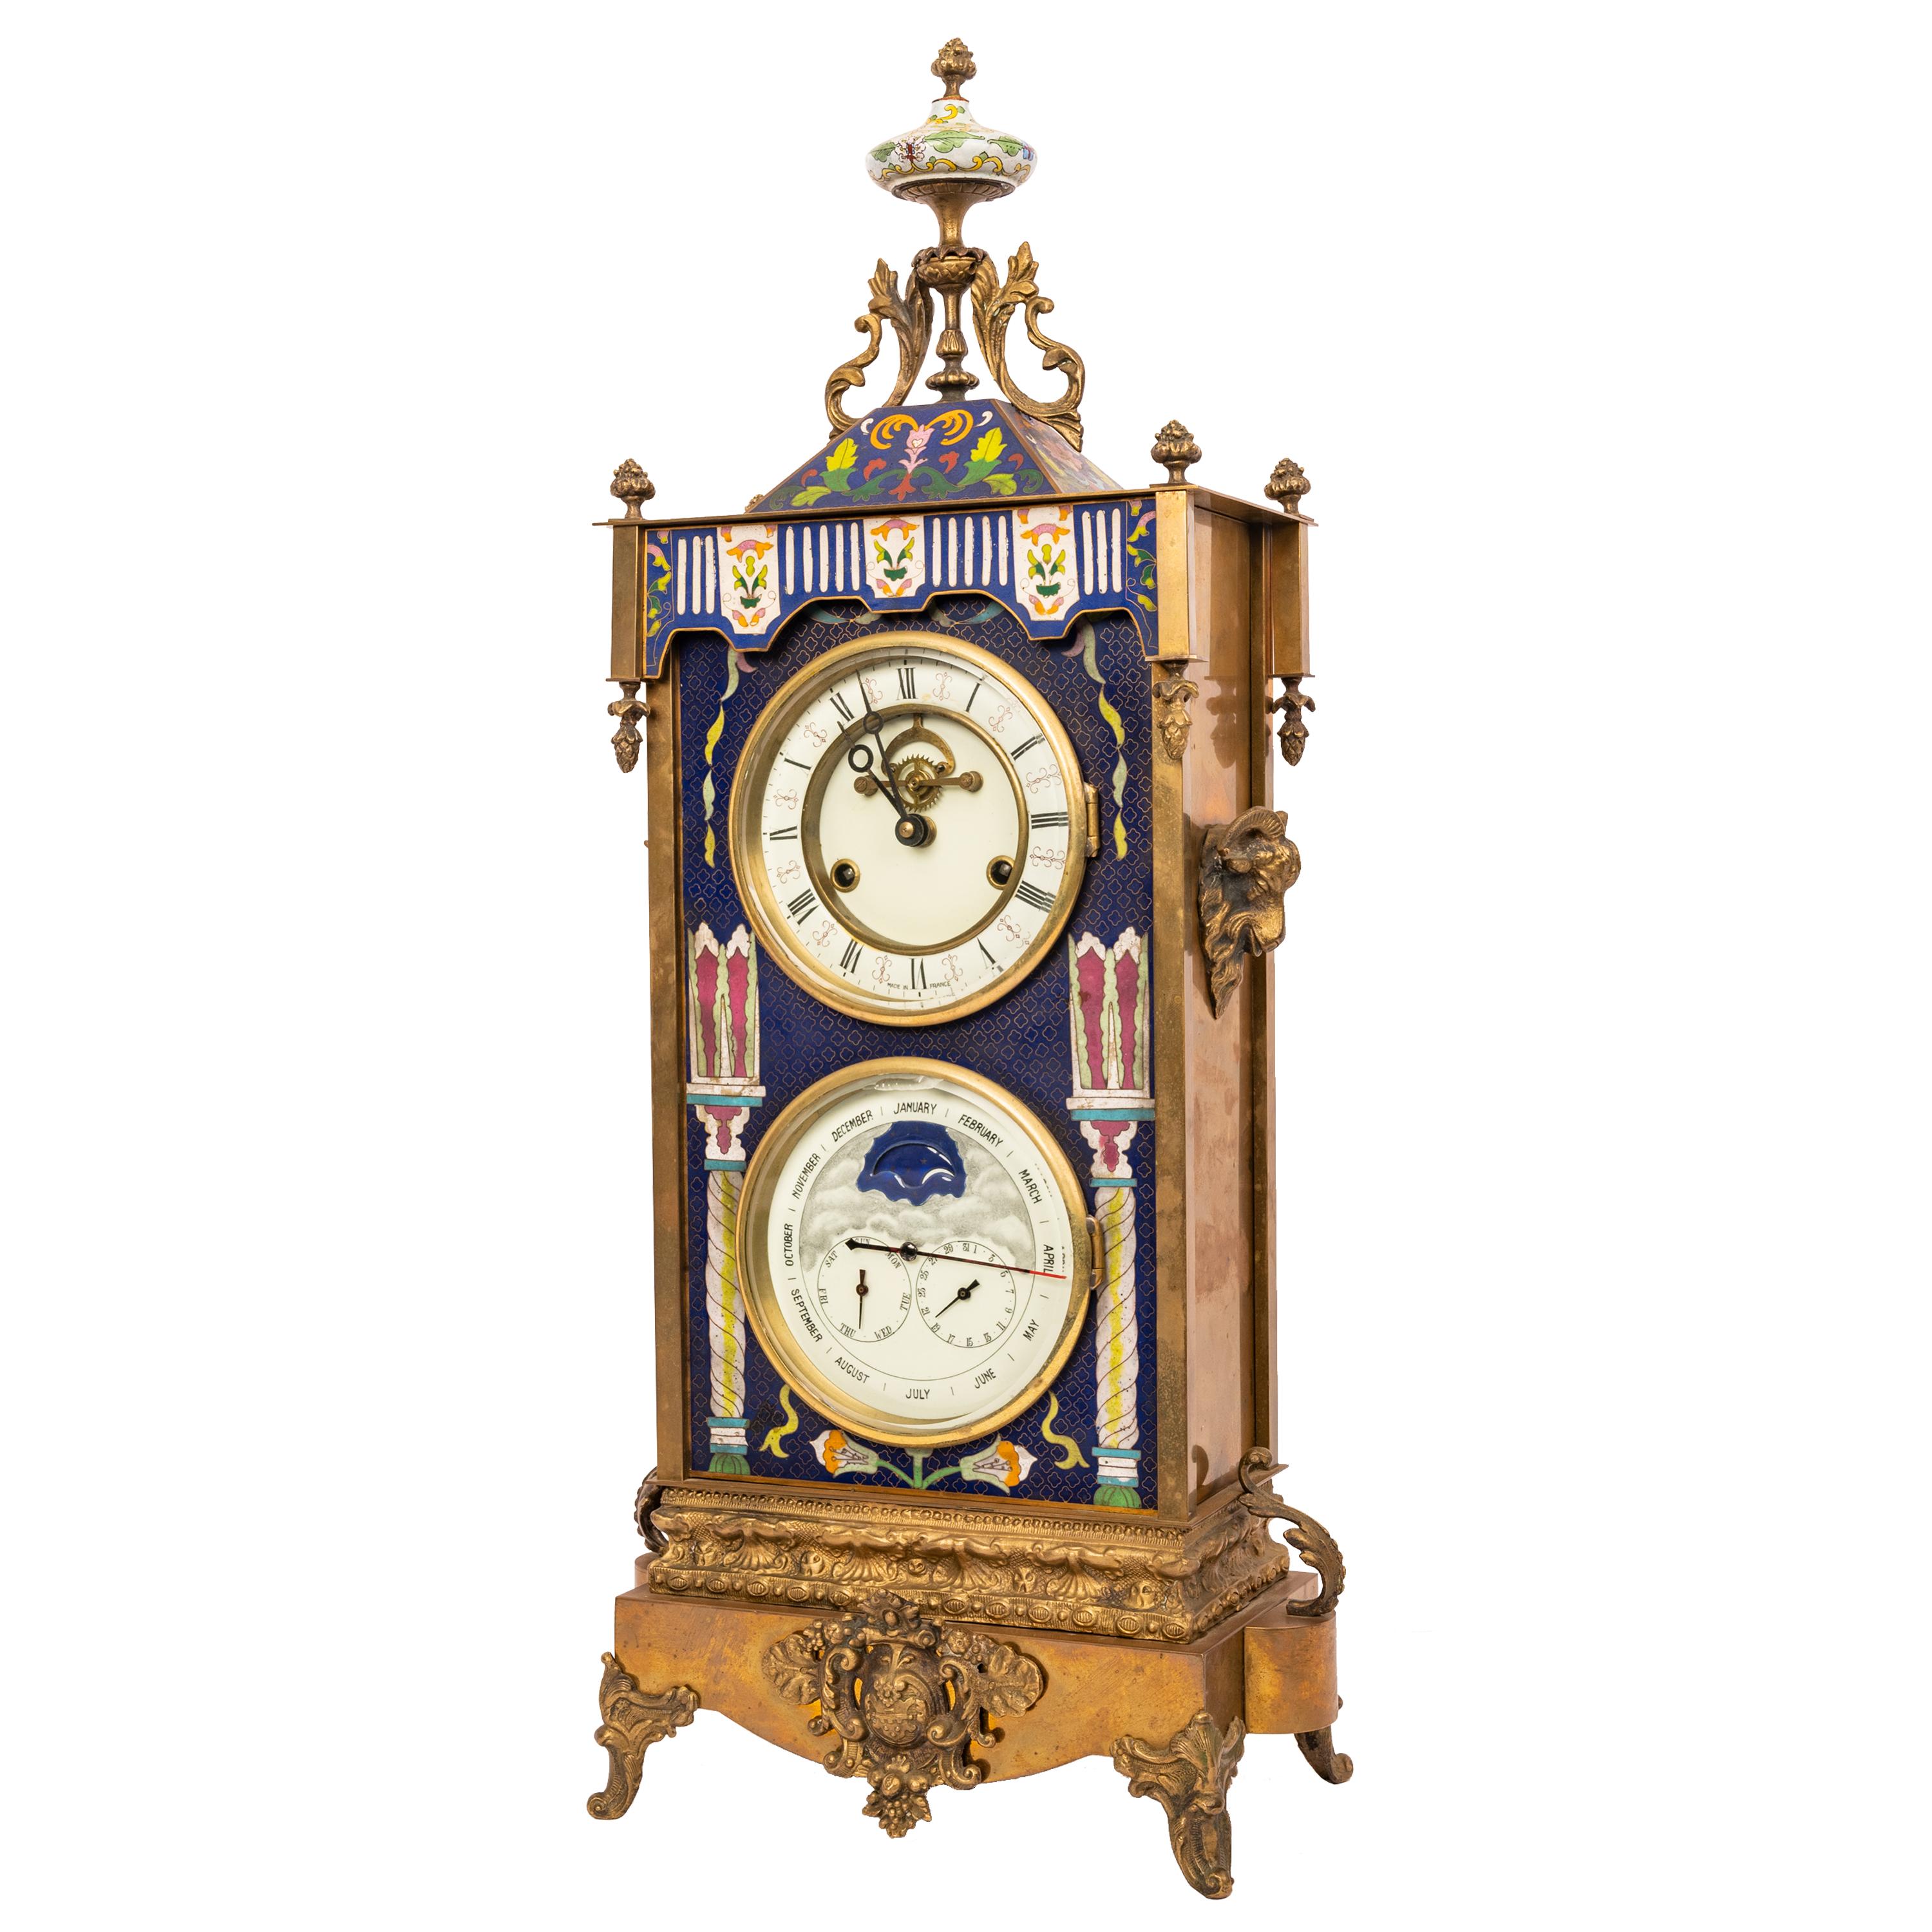 A good and large antique French brass Cloisonné eight day time and strike astronomical calendar clock, circa 1890.
The clock having a porcelain finial to the top decorated with a landscape scene. Below is a cloisonné trapezoid shaped top surrounded